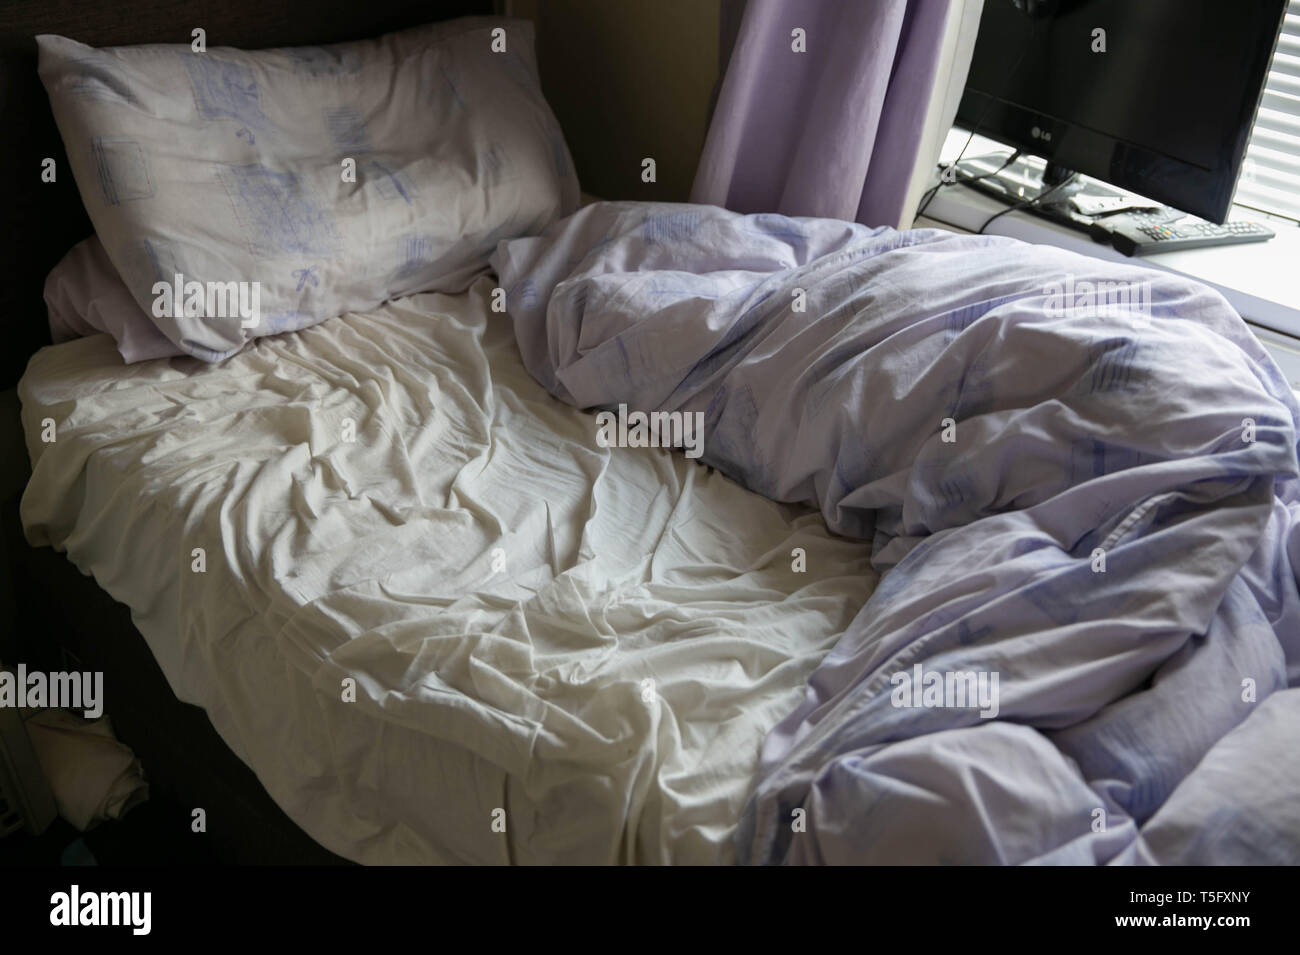 Bed After A Restless Sleep Stock Photo